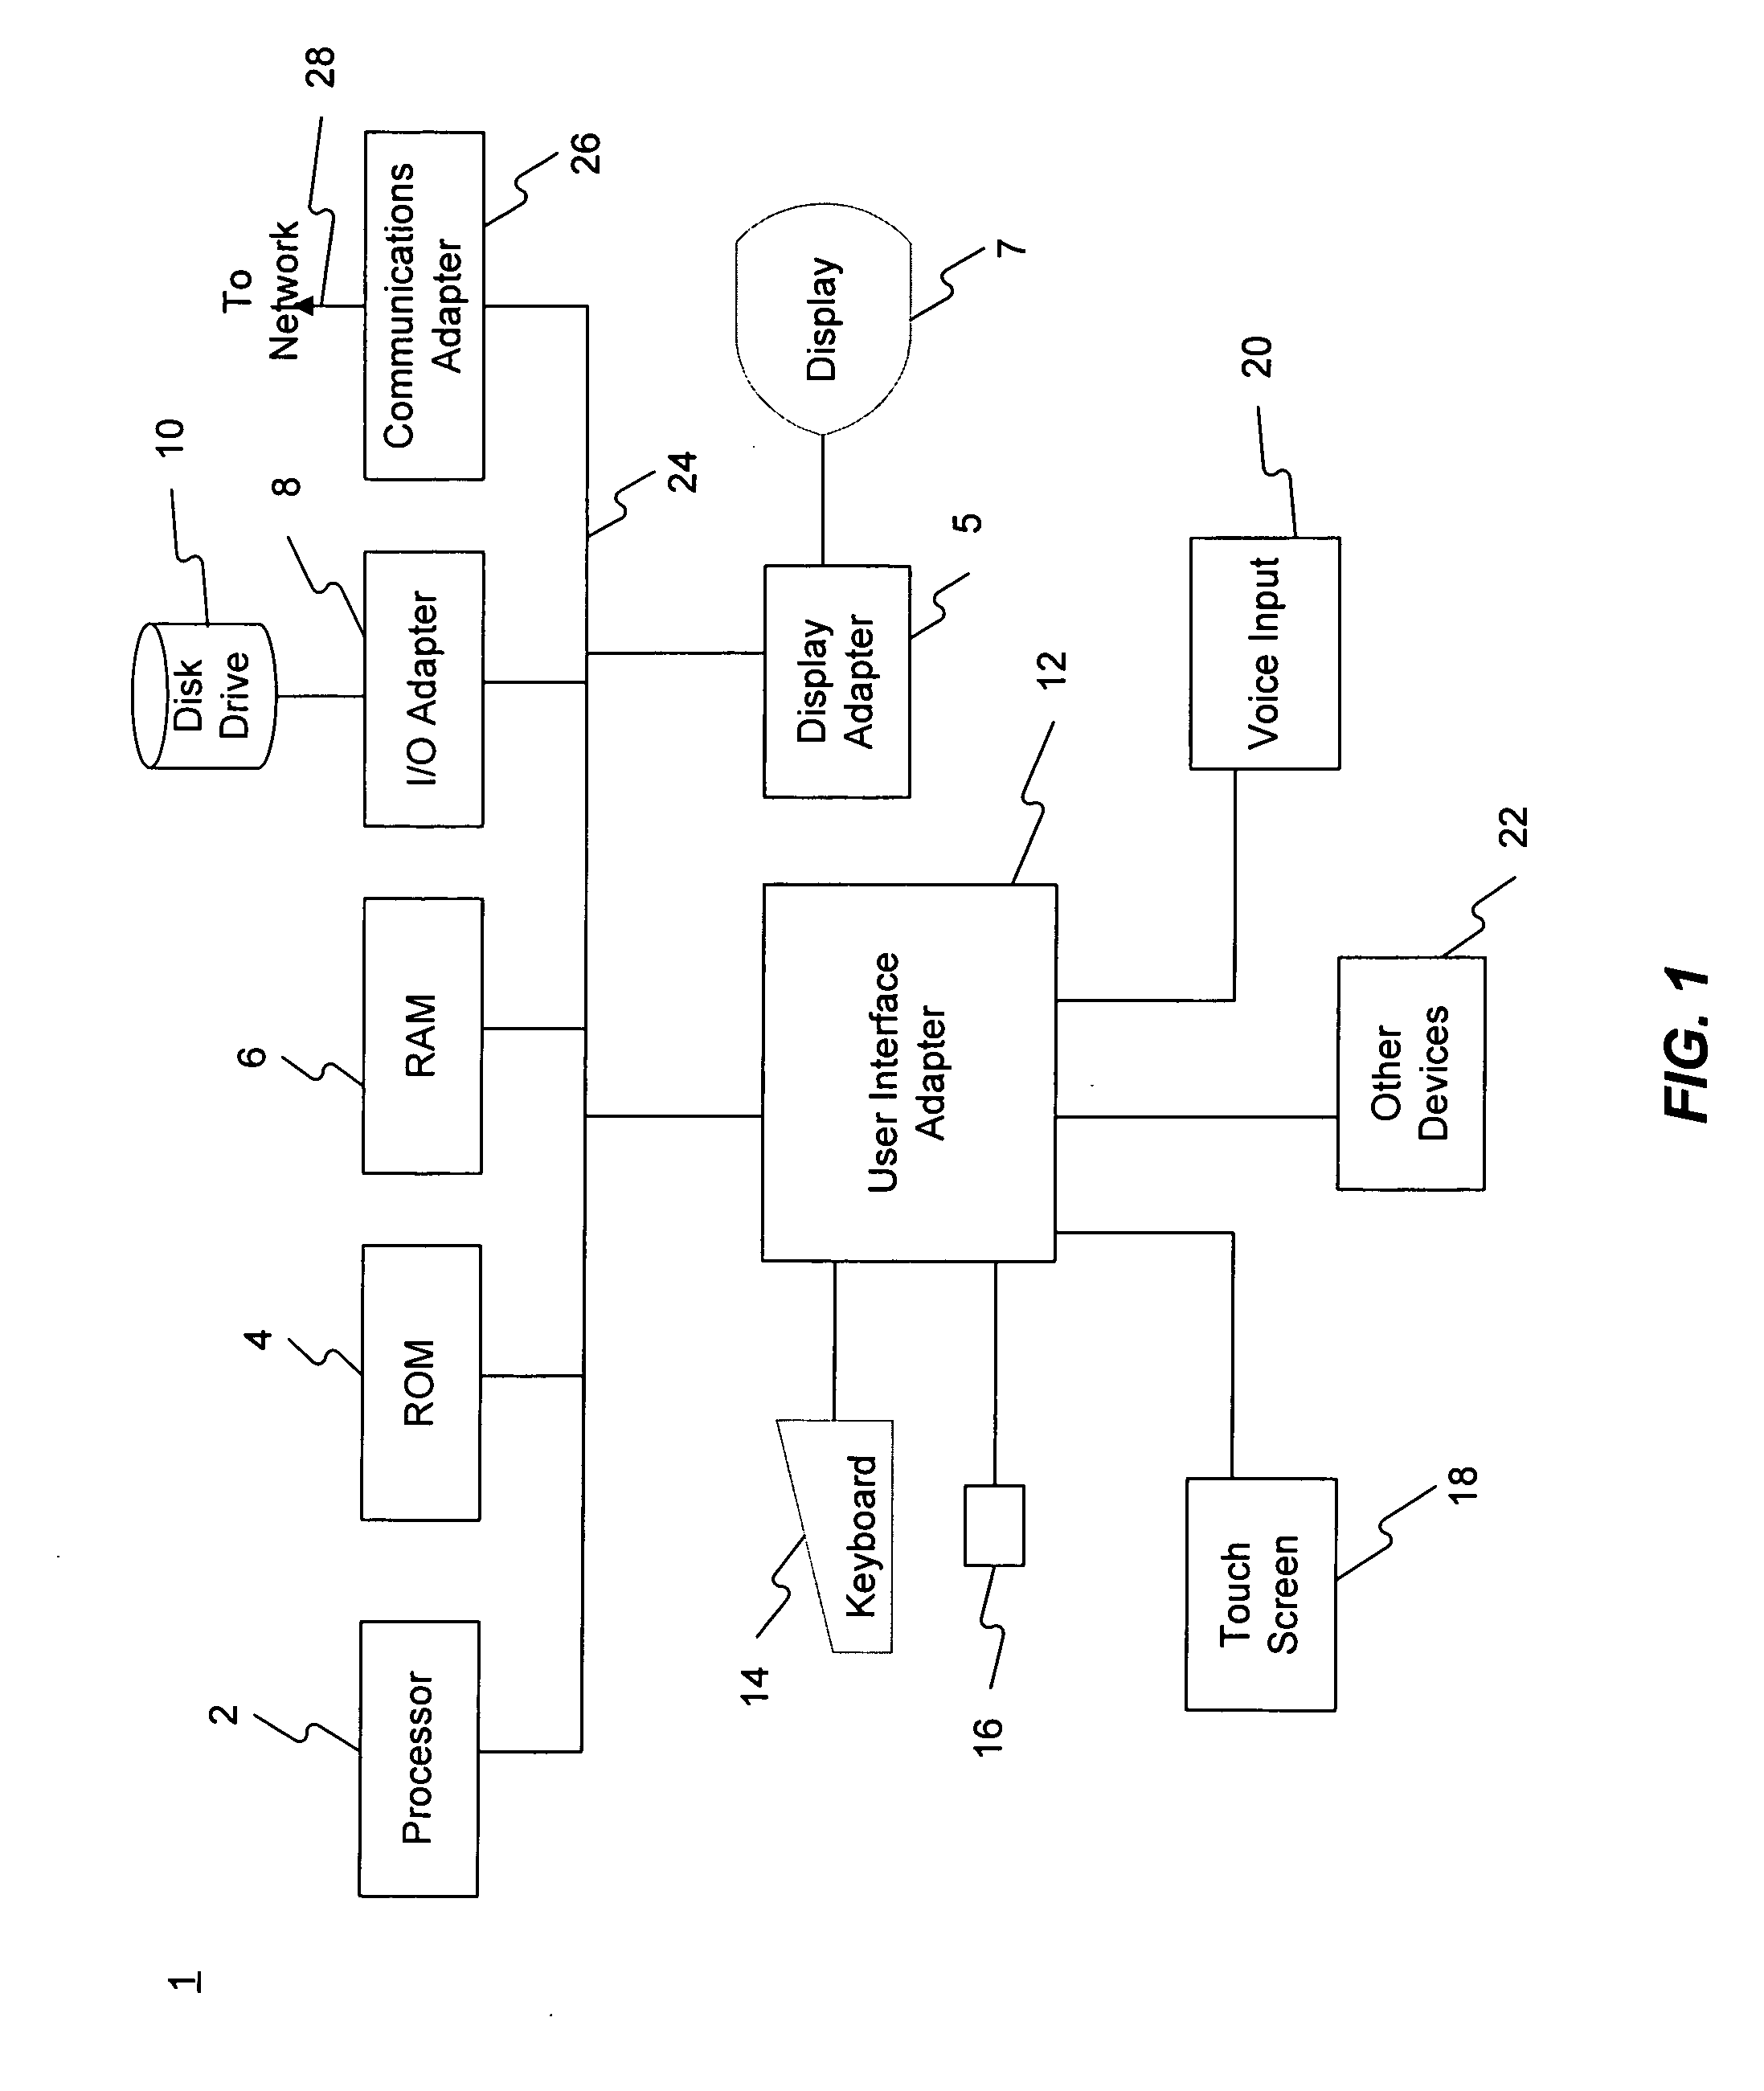 Method and system for design and analysis of fastened joints